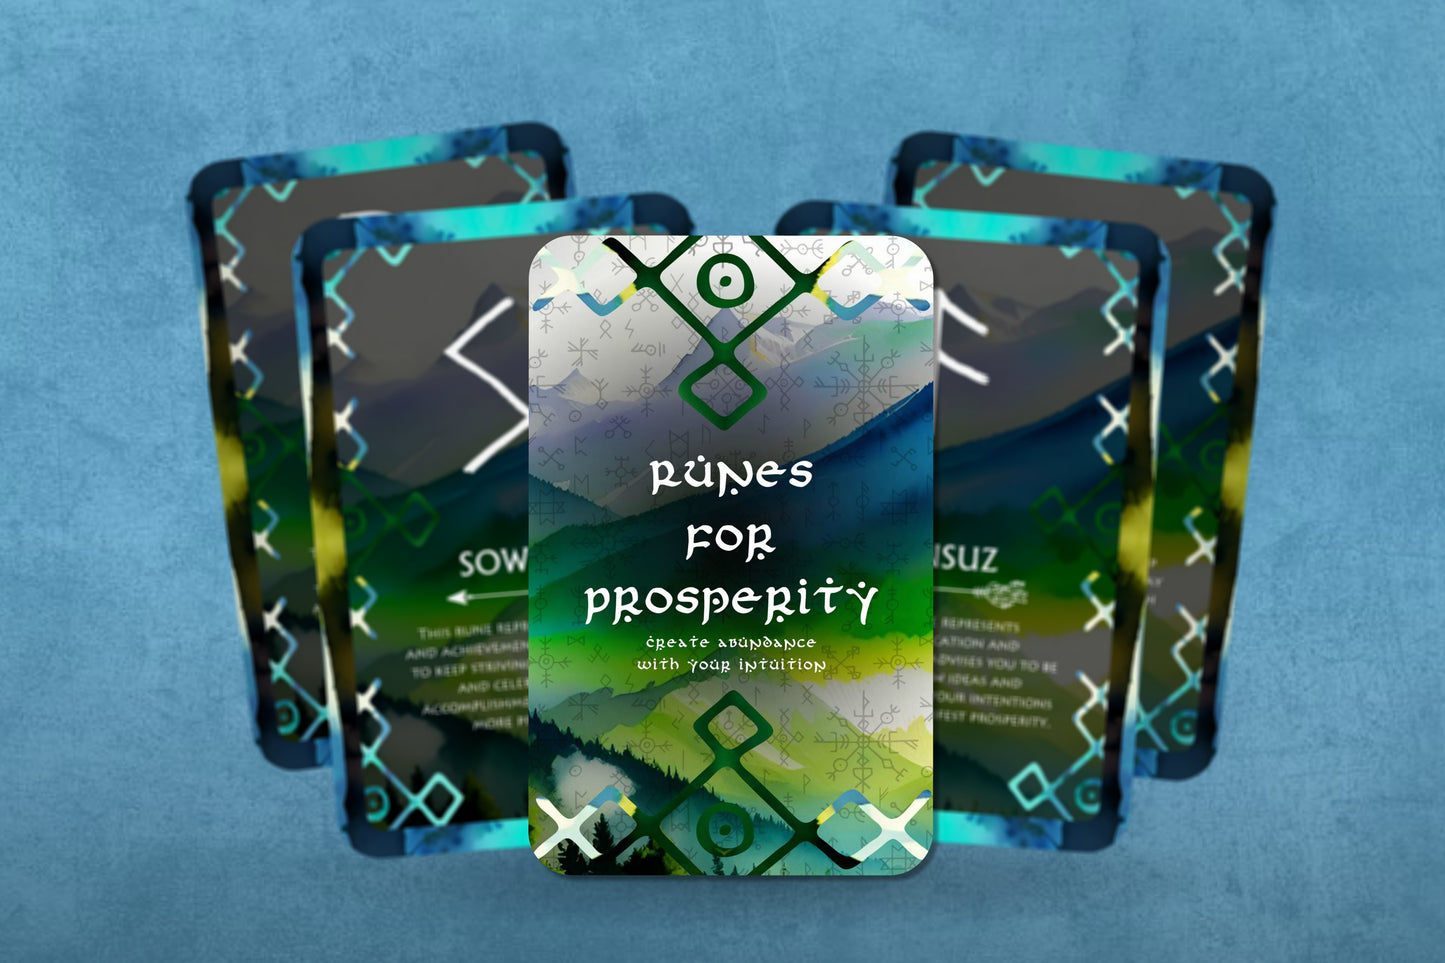 Runes of Prosperity - Create abundance with your intuition